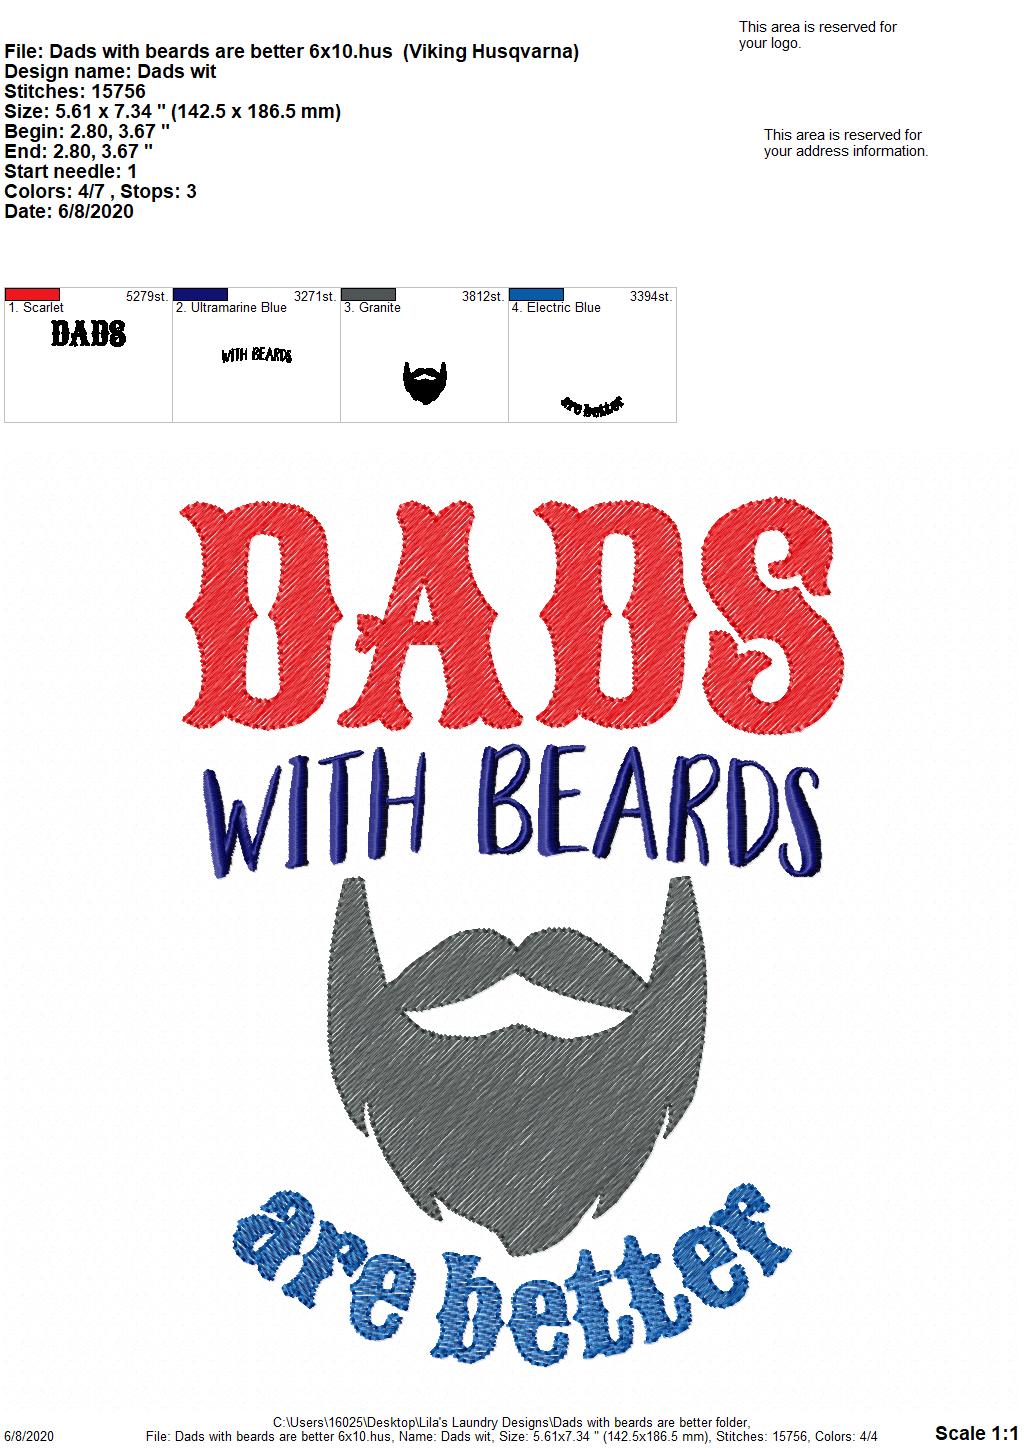 Dads with beards are better - 2 Sizes - Digital Embroidery Design